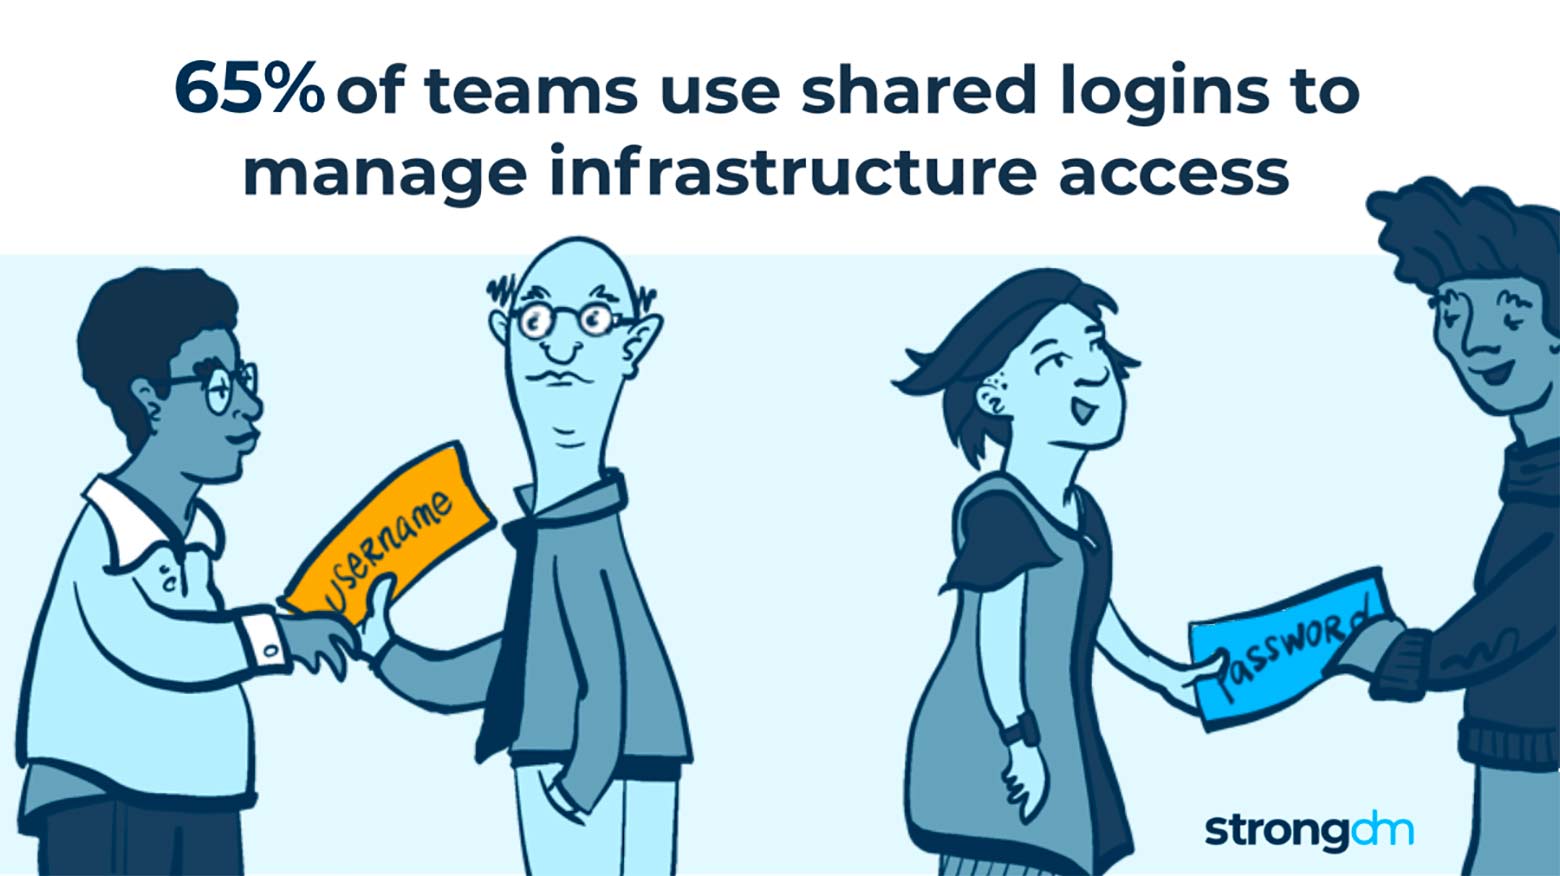 65% of teams use shared logins to manage infrastructure access